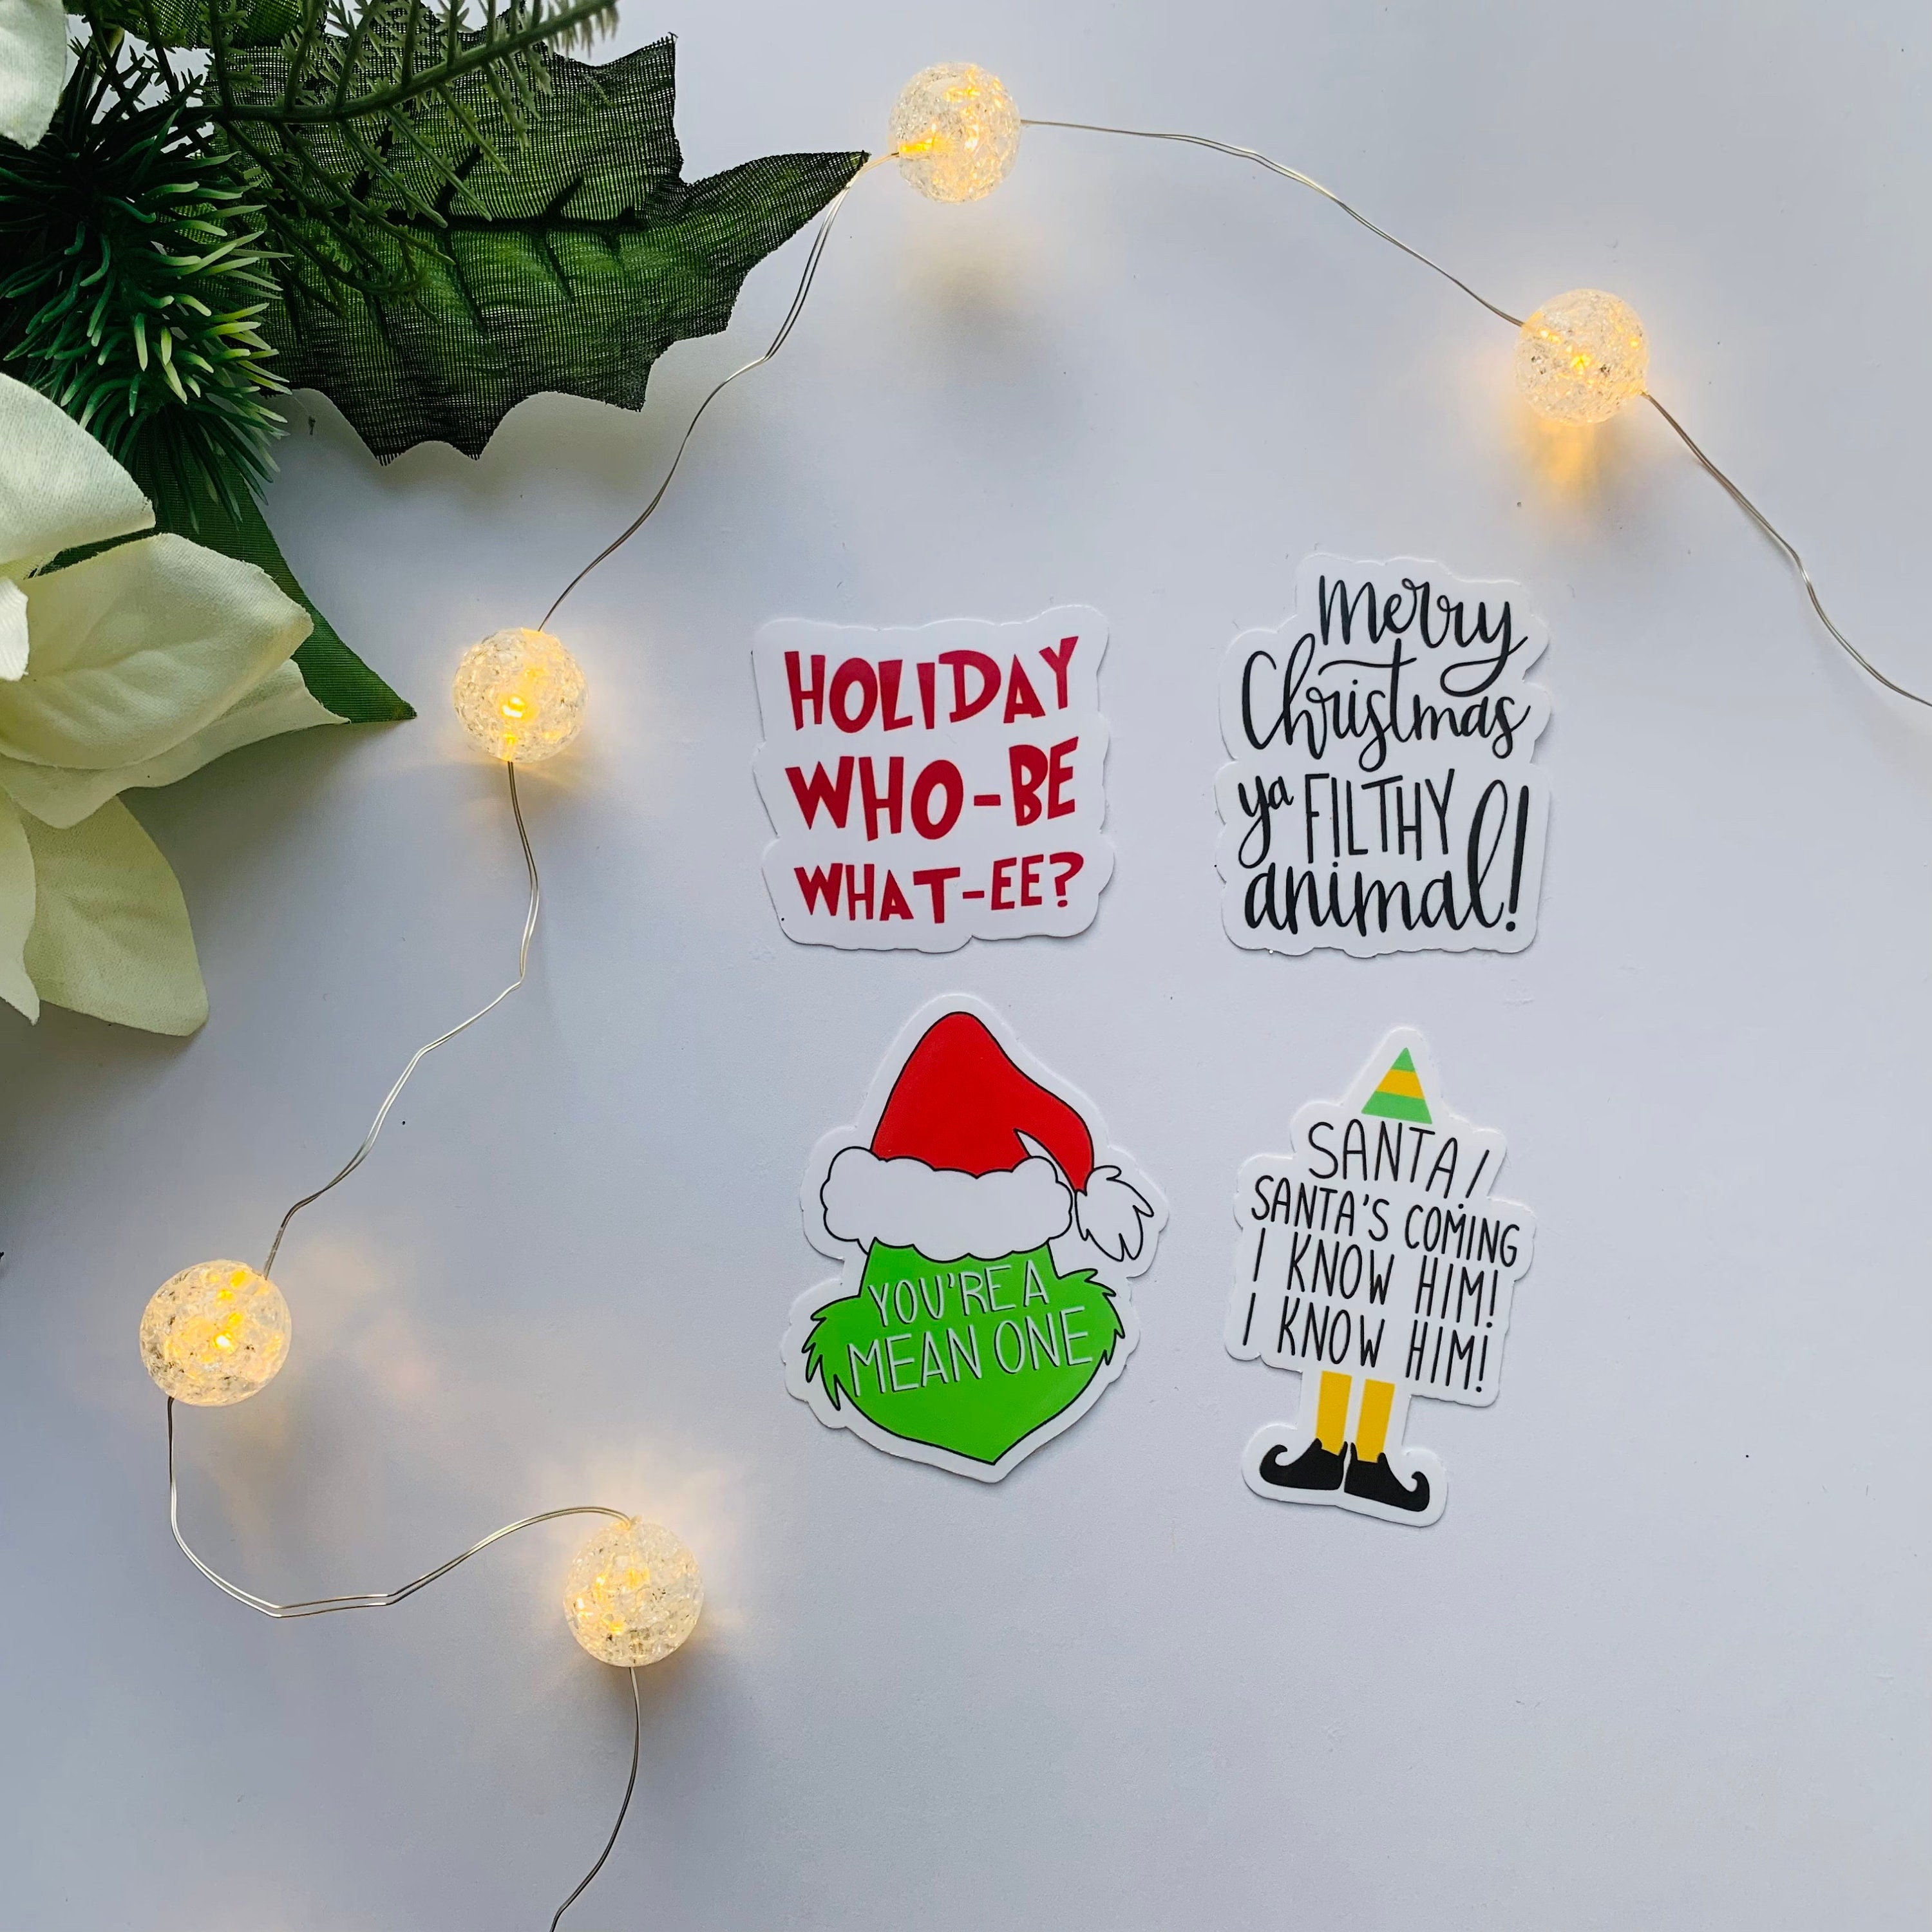 Grinch you're A Mean One Holiday Glossy Waterproof Vinyl Sticker